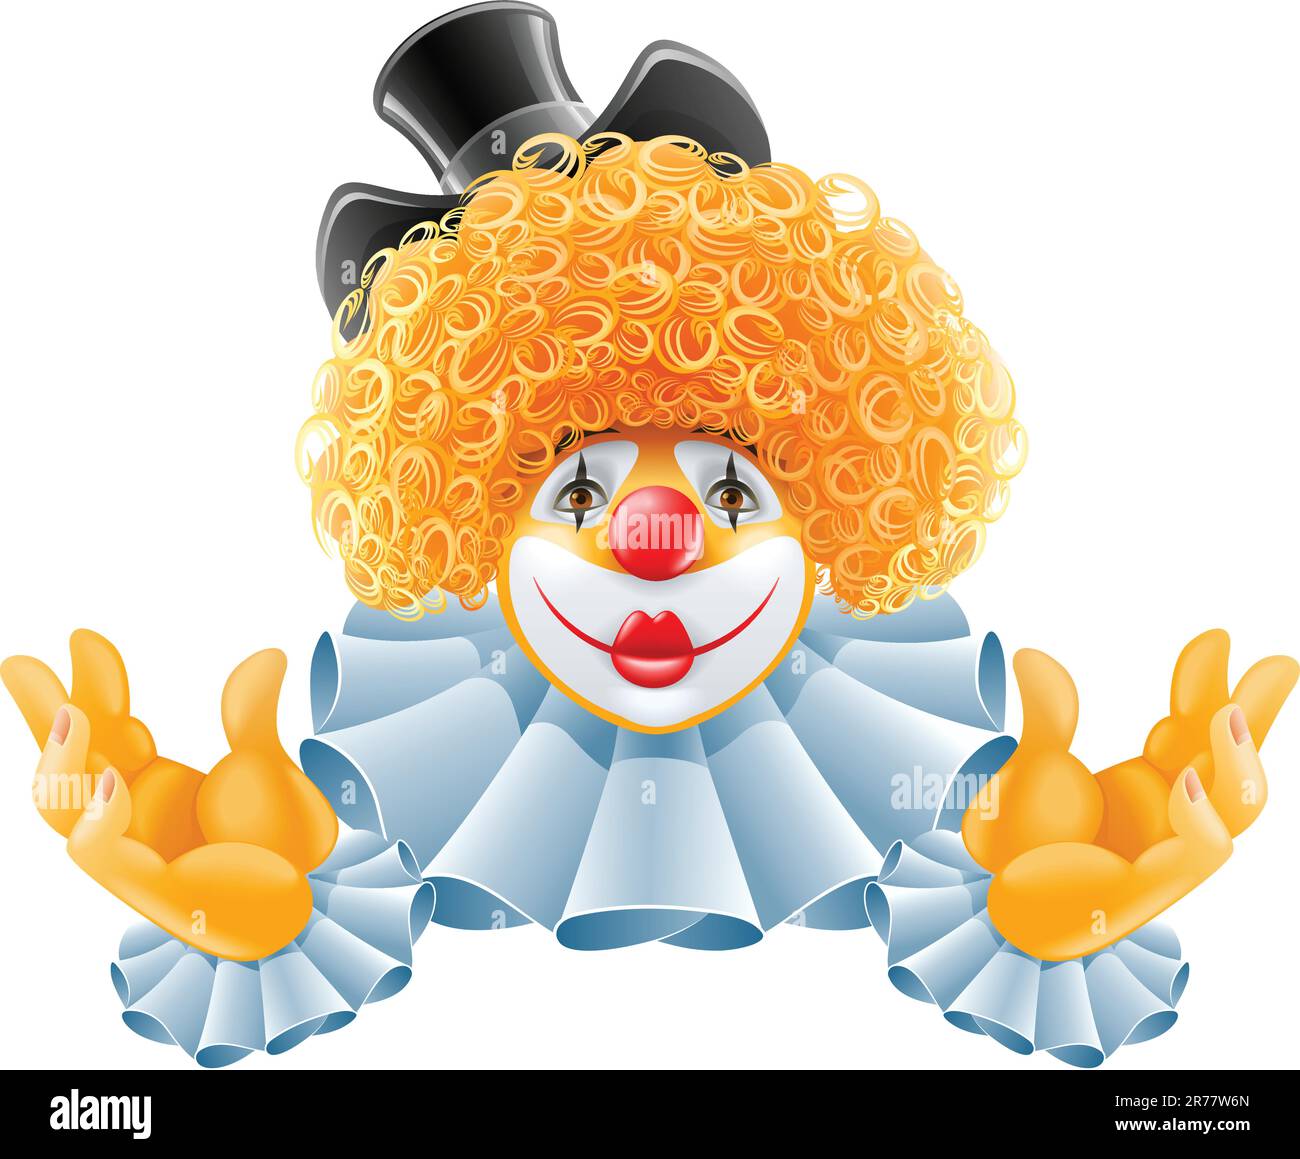 red-haired smiling clown vector illustration isolated on white background Stock Vector